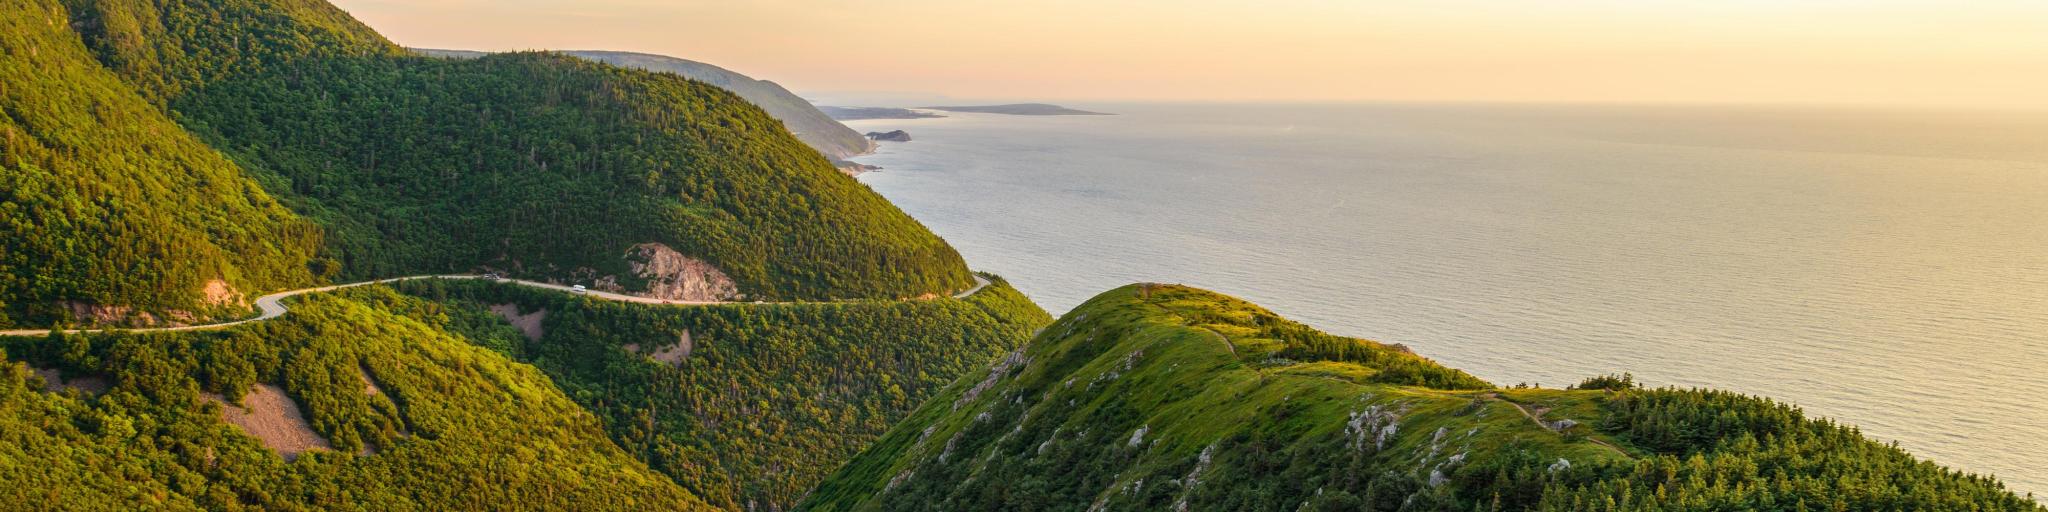 Cape Breton, Nova Scotia, Canada with green covered hills in the foreground hills Skyline looking to a valley below and beyond that the sea on a sunny day.